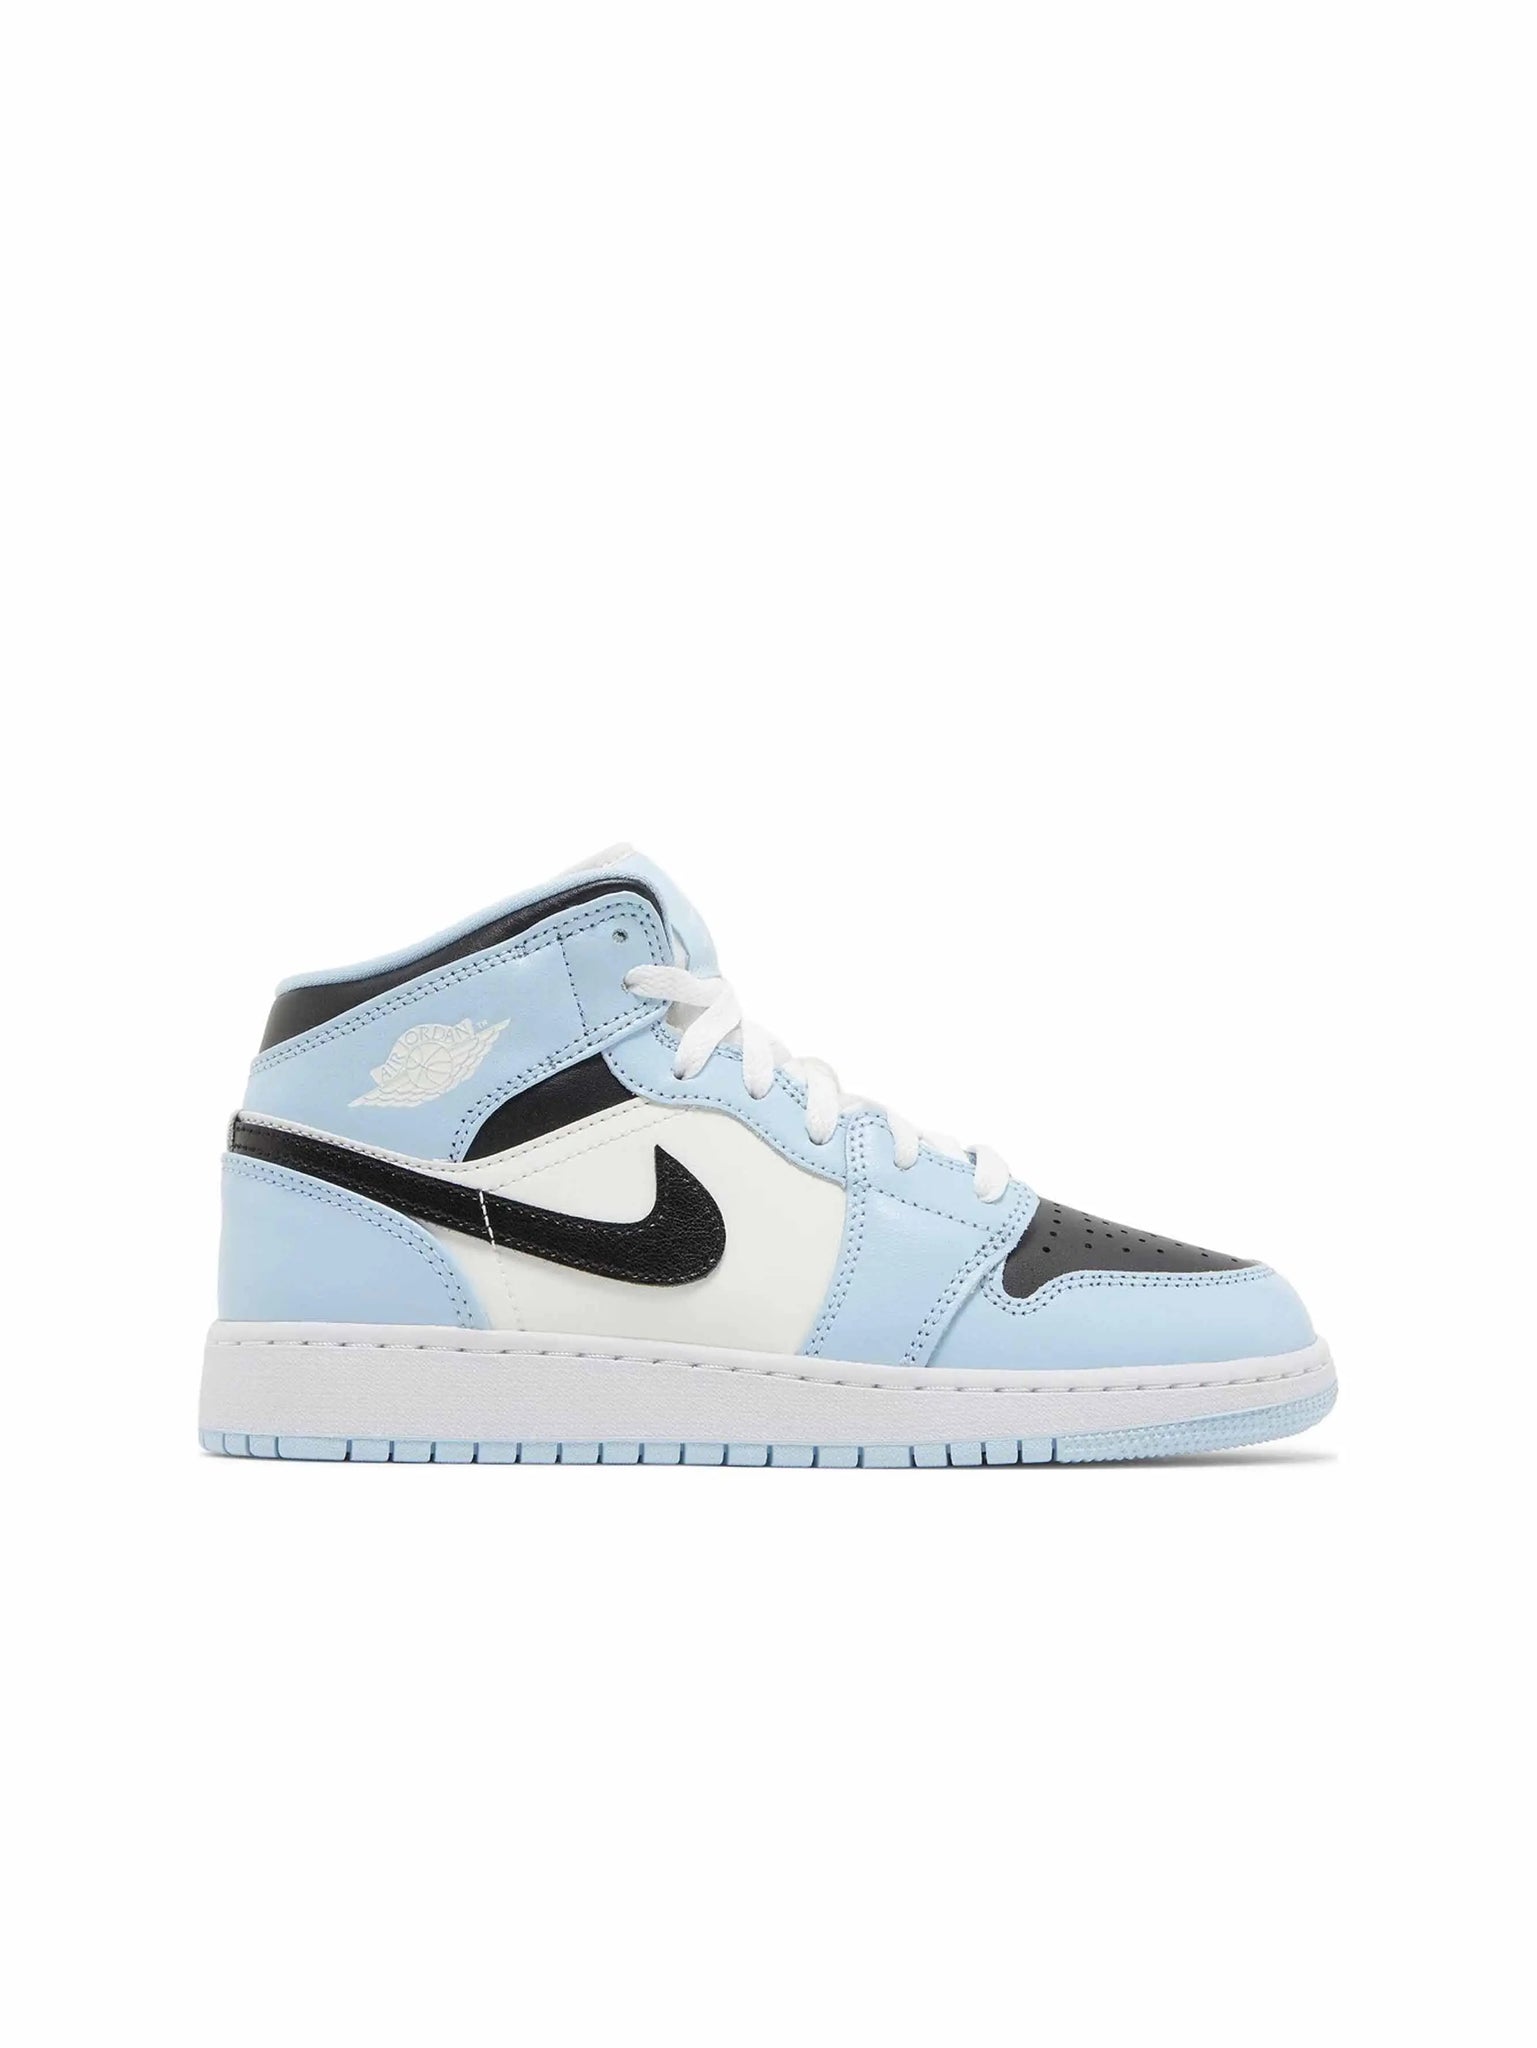 Nike Air Jordan 1 Mid Ice Blue (GS) in Auckland, New Zealand - Shop name